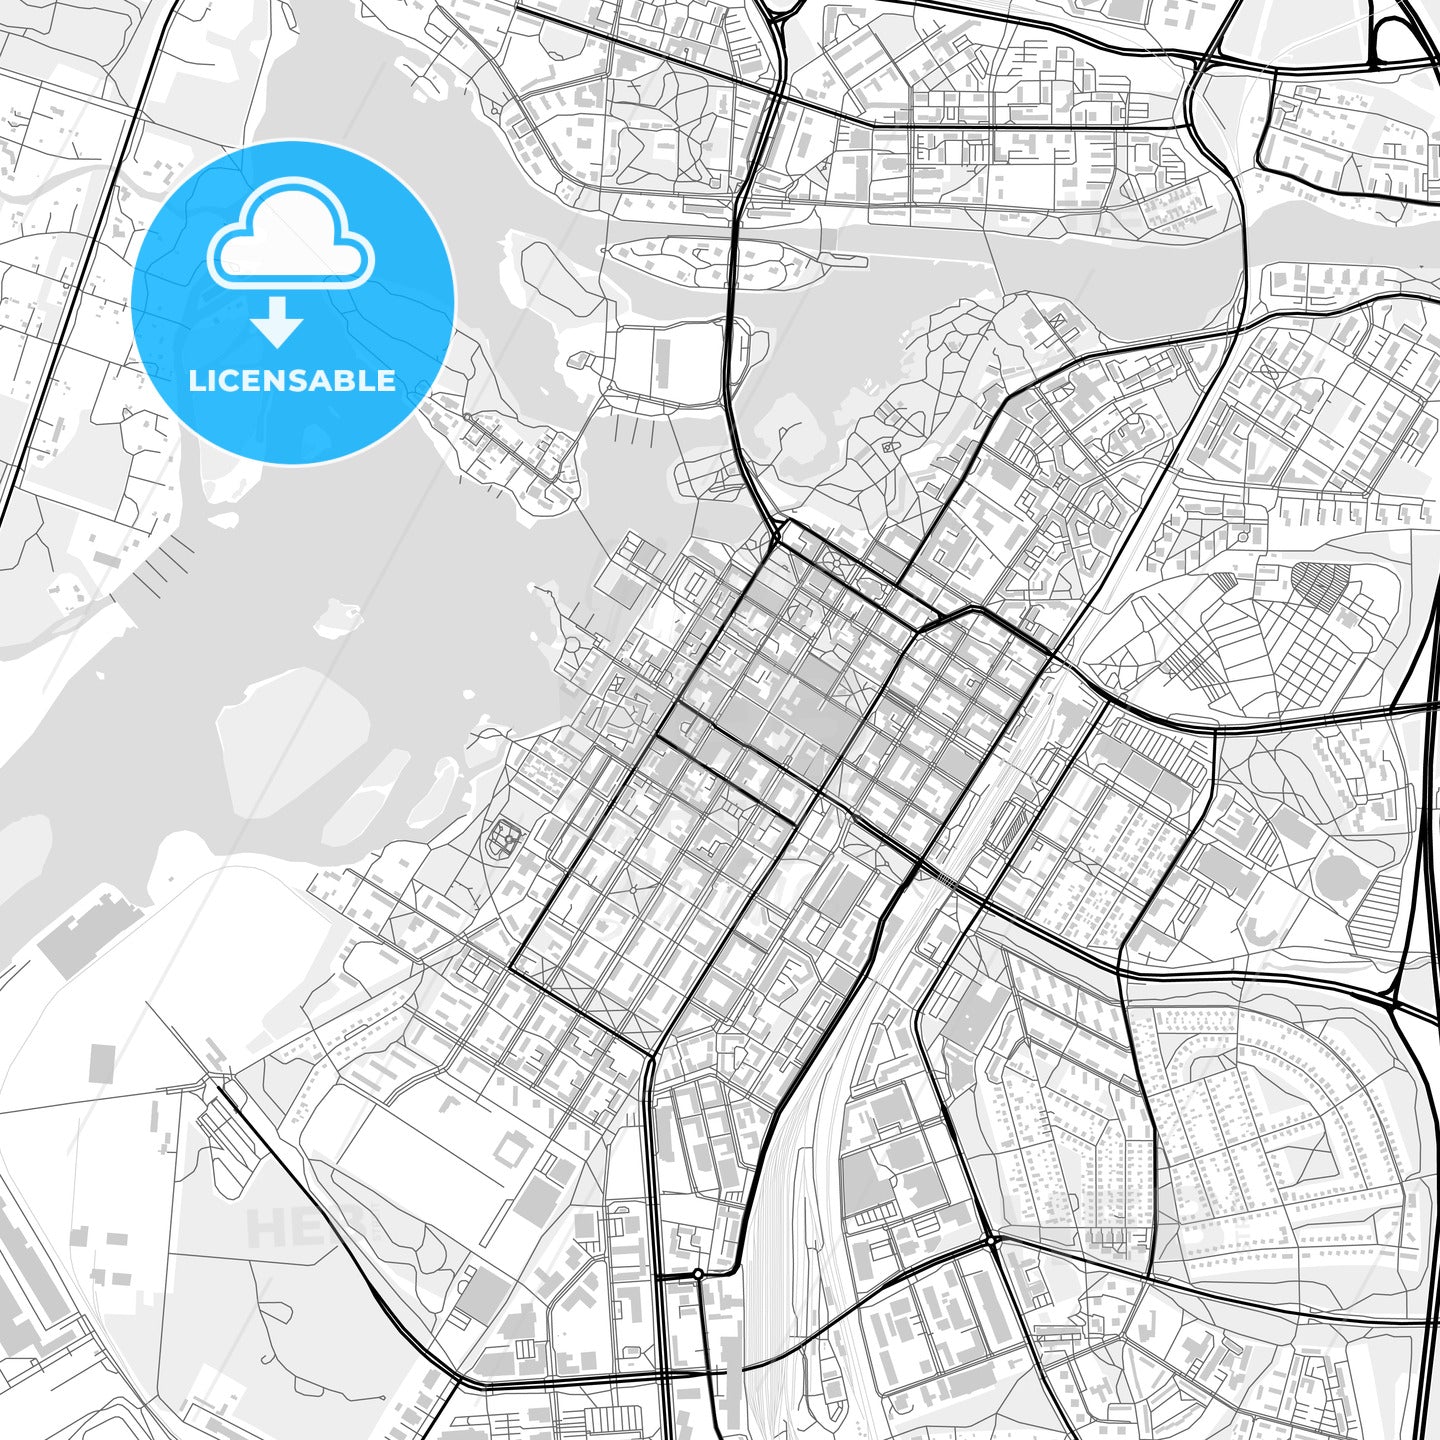 Downtown map of Oulu, Finland